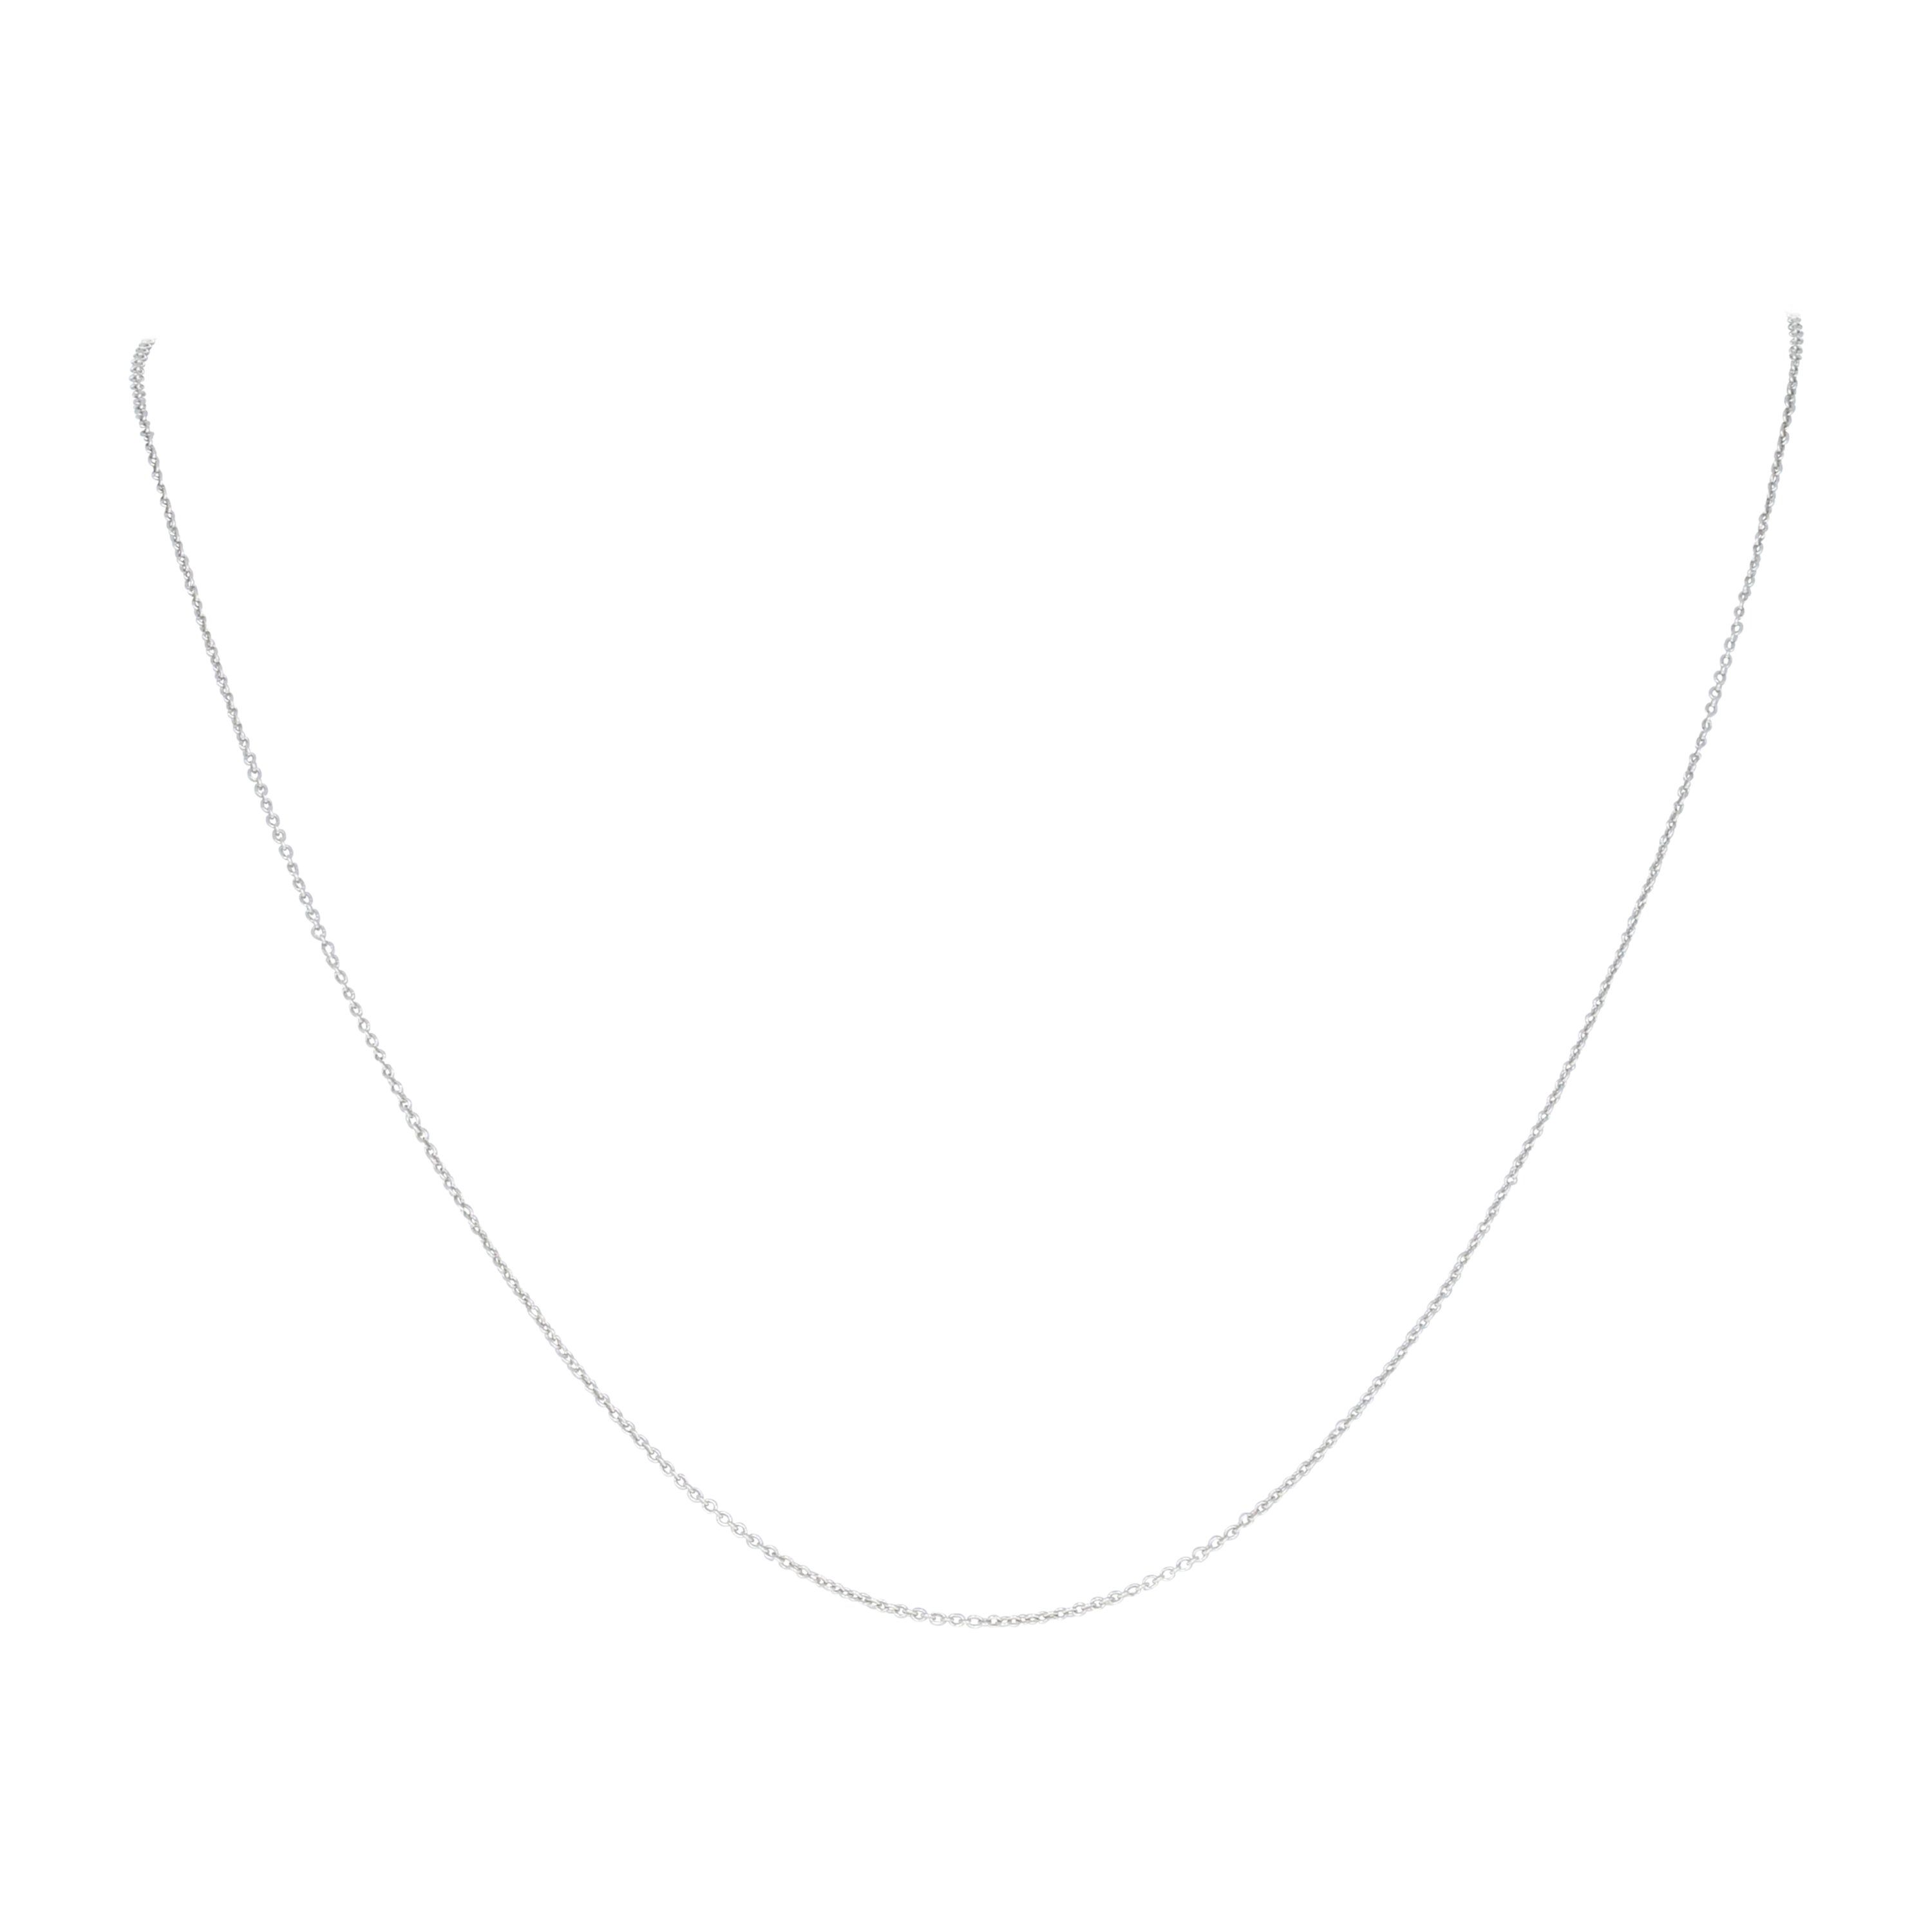 White Gold Cable Chain Necklace - 14k Adjustable Length For Sale